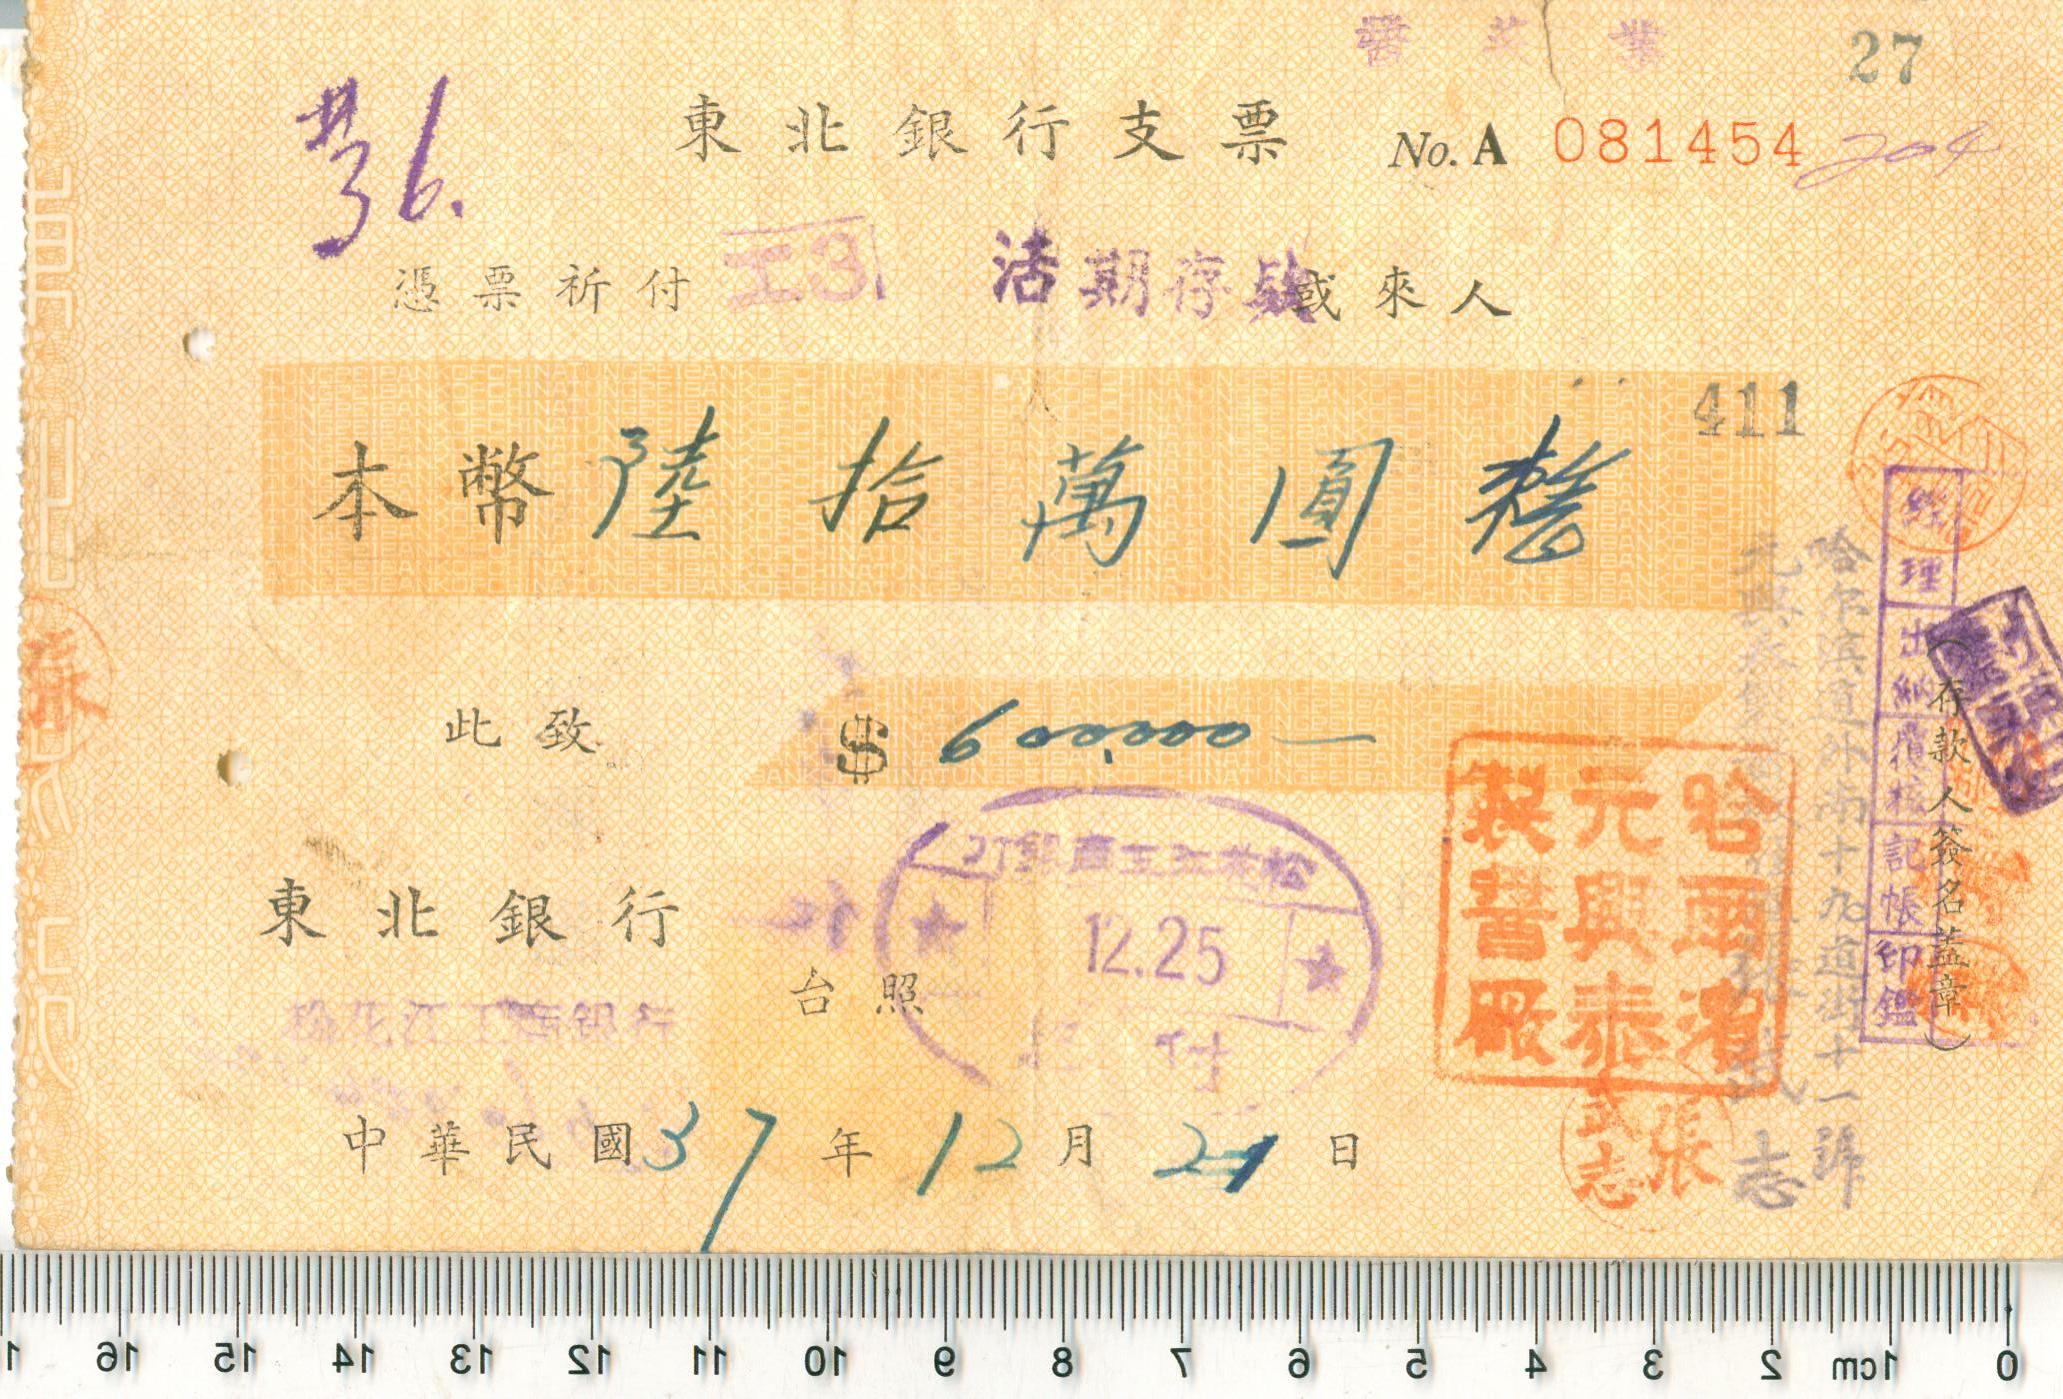 D1785, Check of North Bank of China, 1948 Cheque.